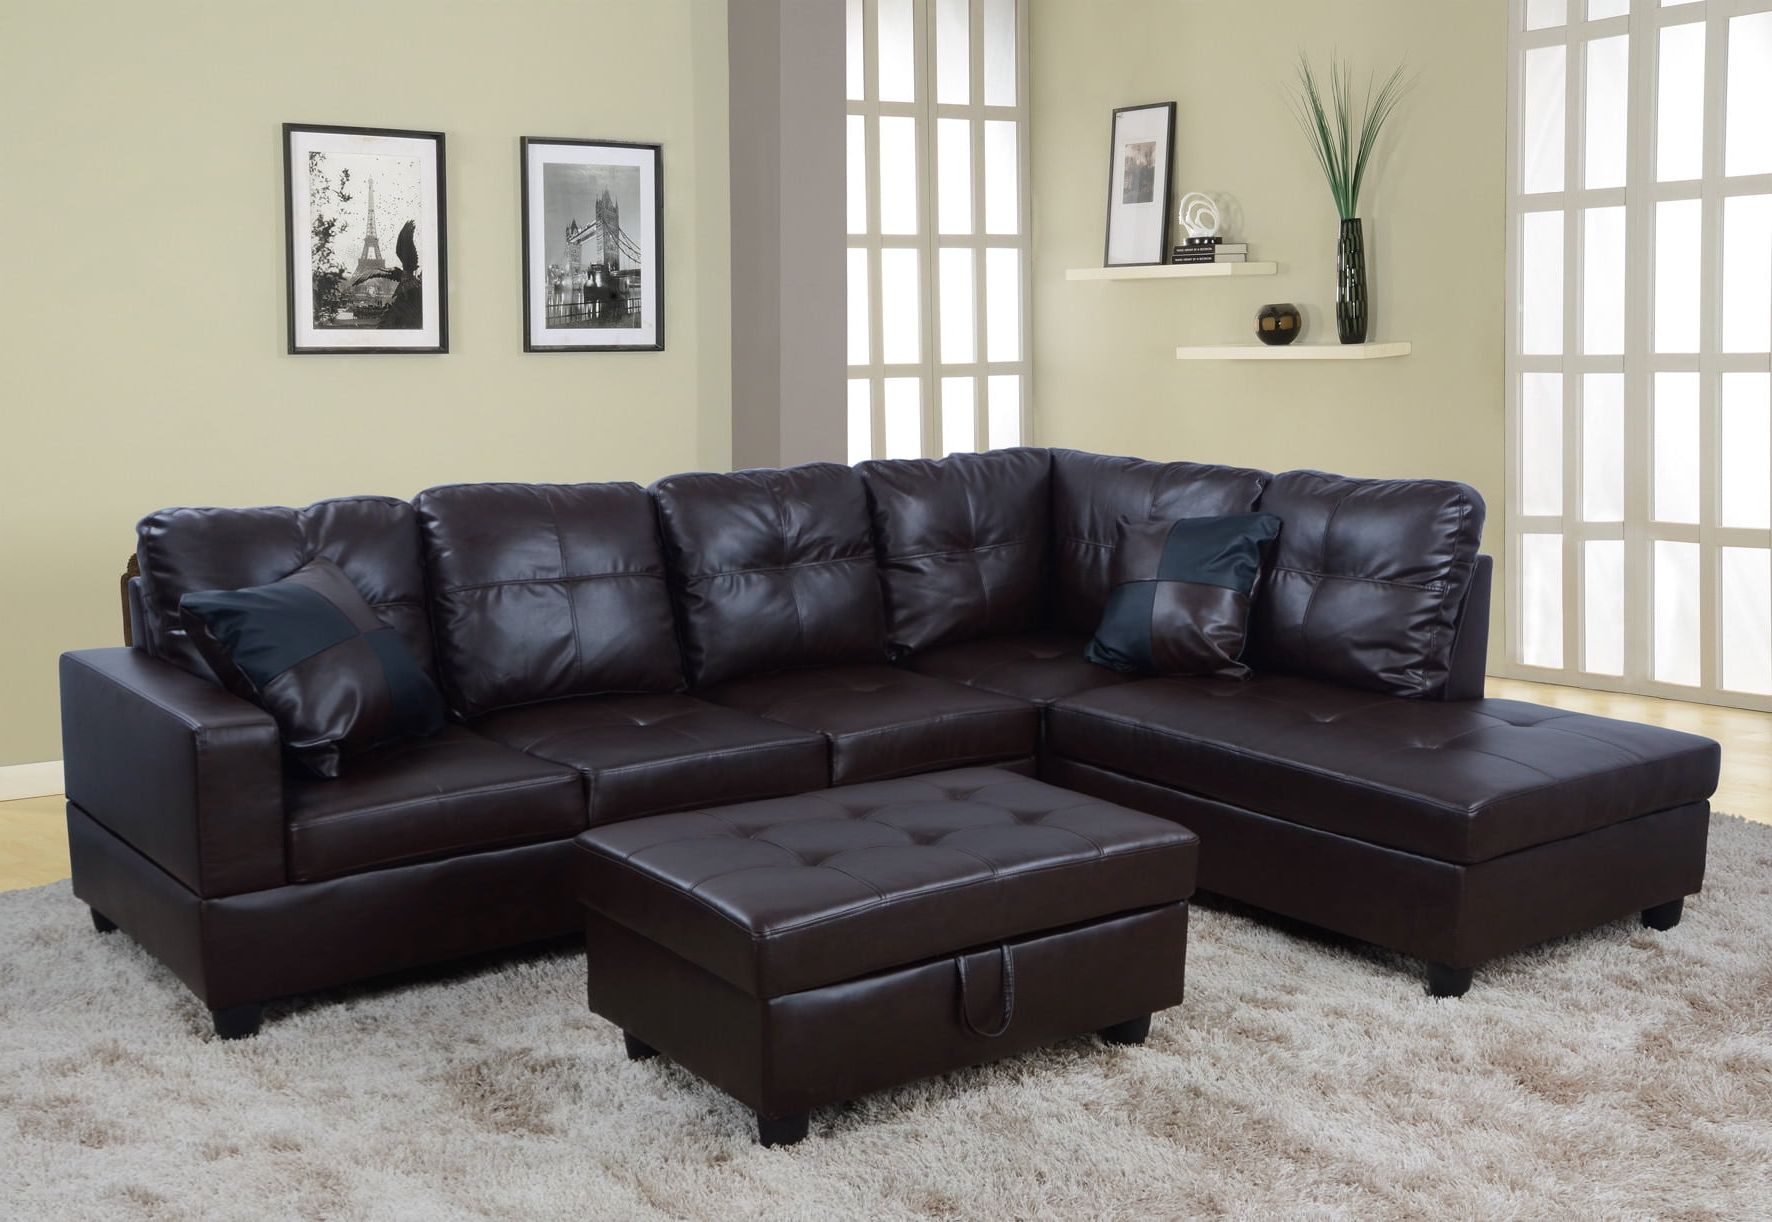 Widely Used Ponliving Furniture Raphael Brown Faux Leather Left Facing Sectional With Faux Leather Sectional Sofa Sets (View 14 of 15)